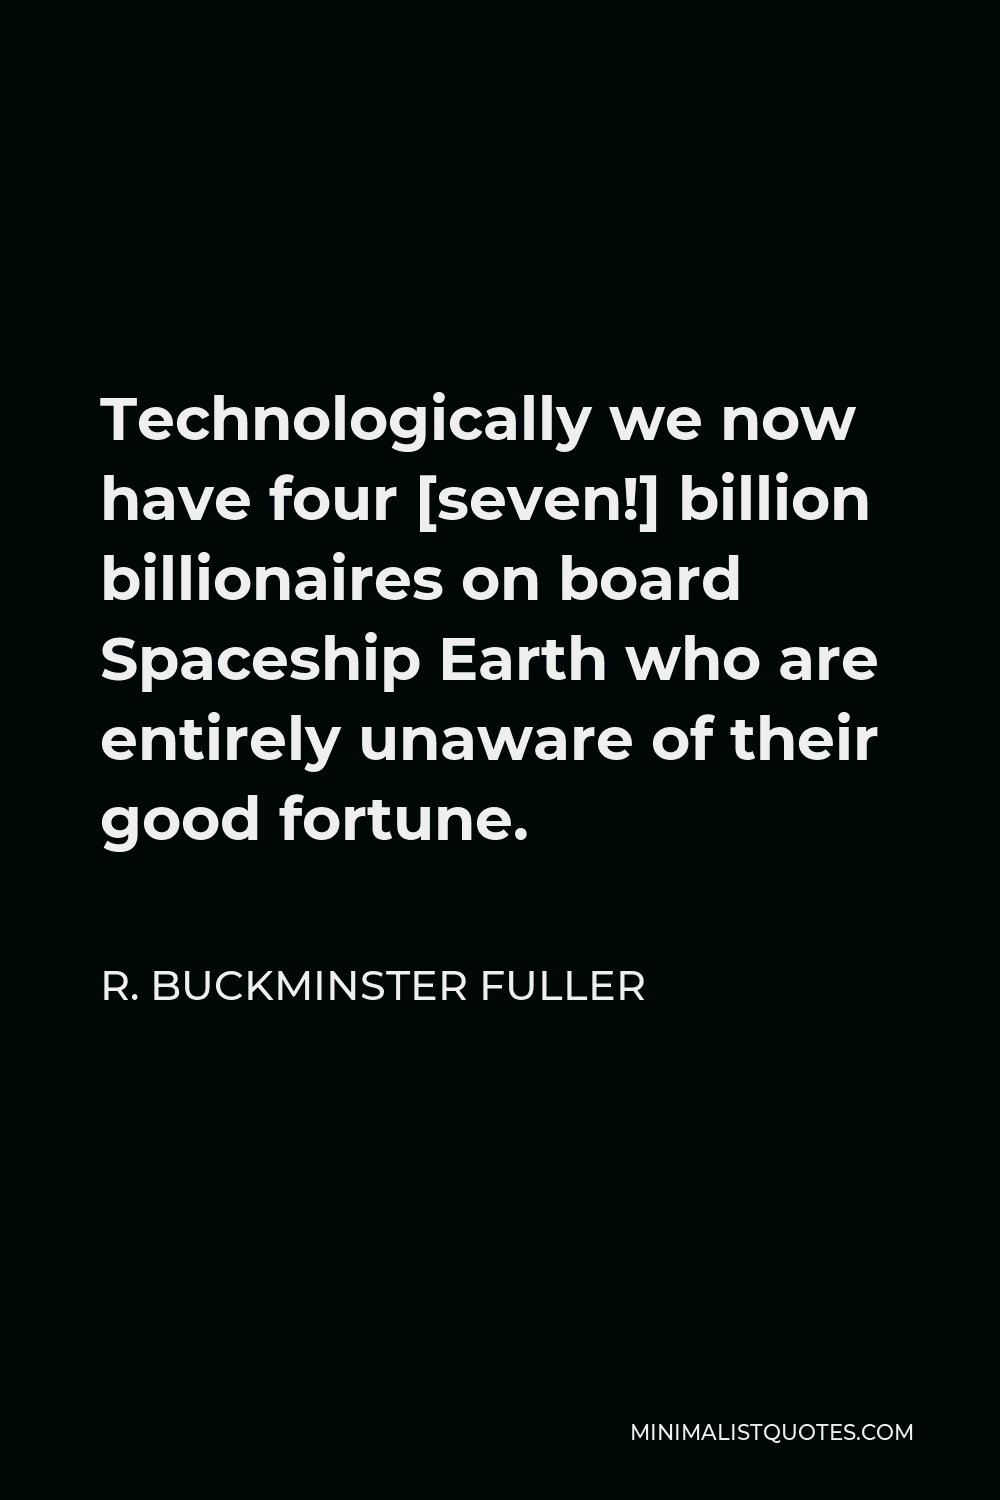 R. Buckminster Fuller Quote - Technologically we now have four [seven!] billion billionaires on board Spaceship Earth who are entirely unaware of their good fortune.